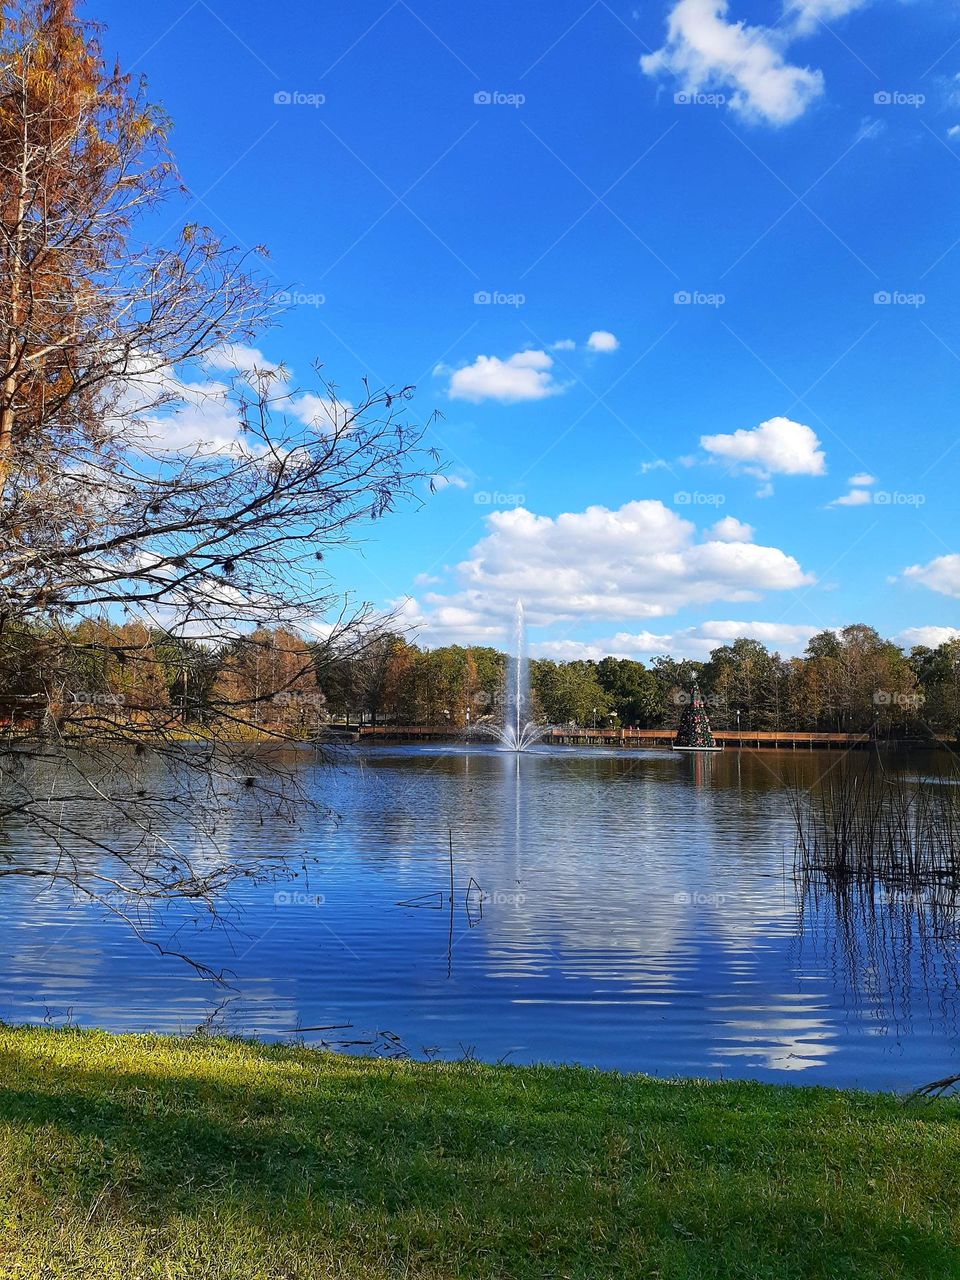 A beautiful landscape view with blue sky and white clouds. In the middle of the lake there is a fountain and a Christmas tree. Photo is of Lake Lily Park in Maitland, Florida.